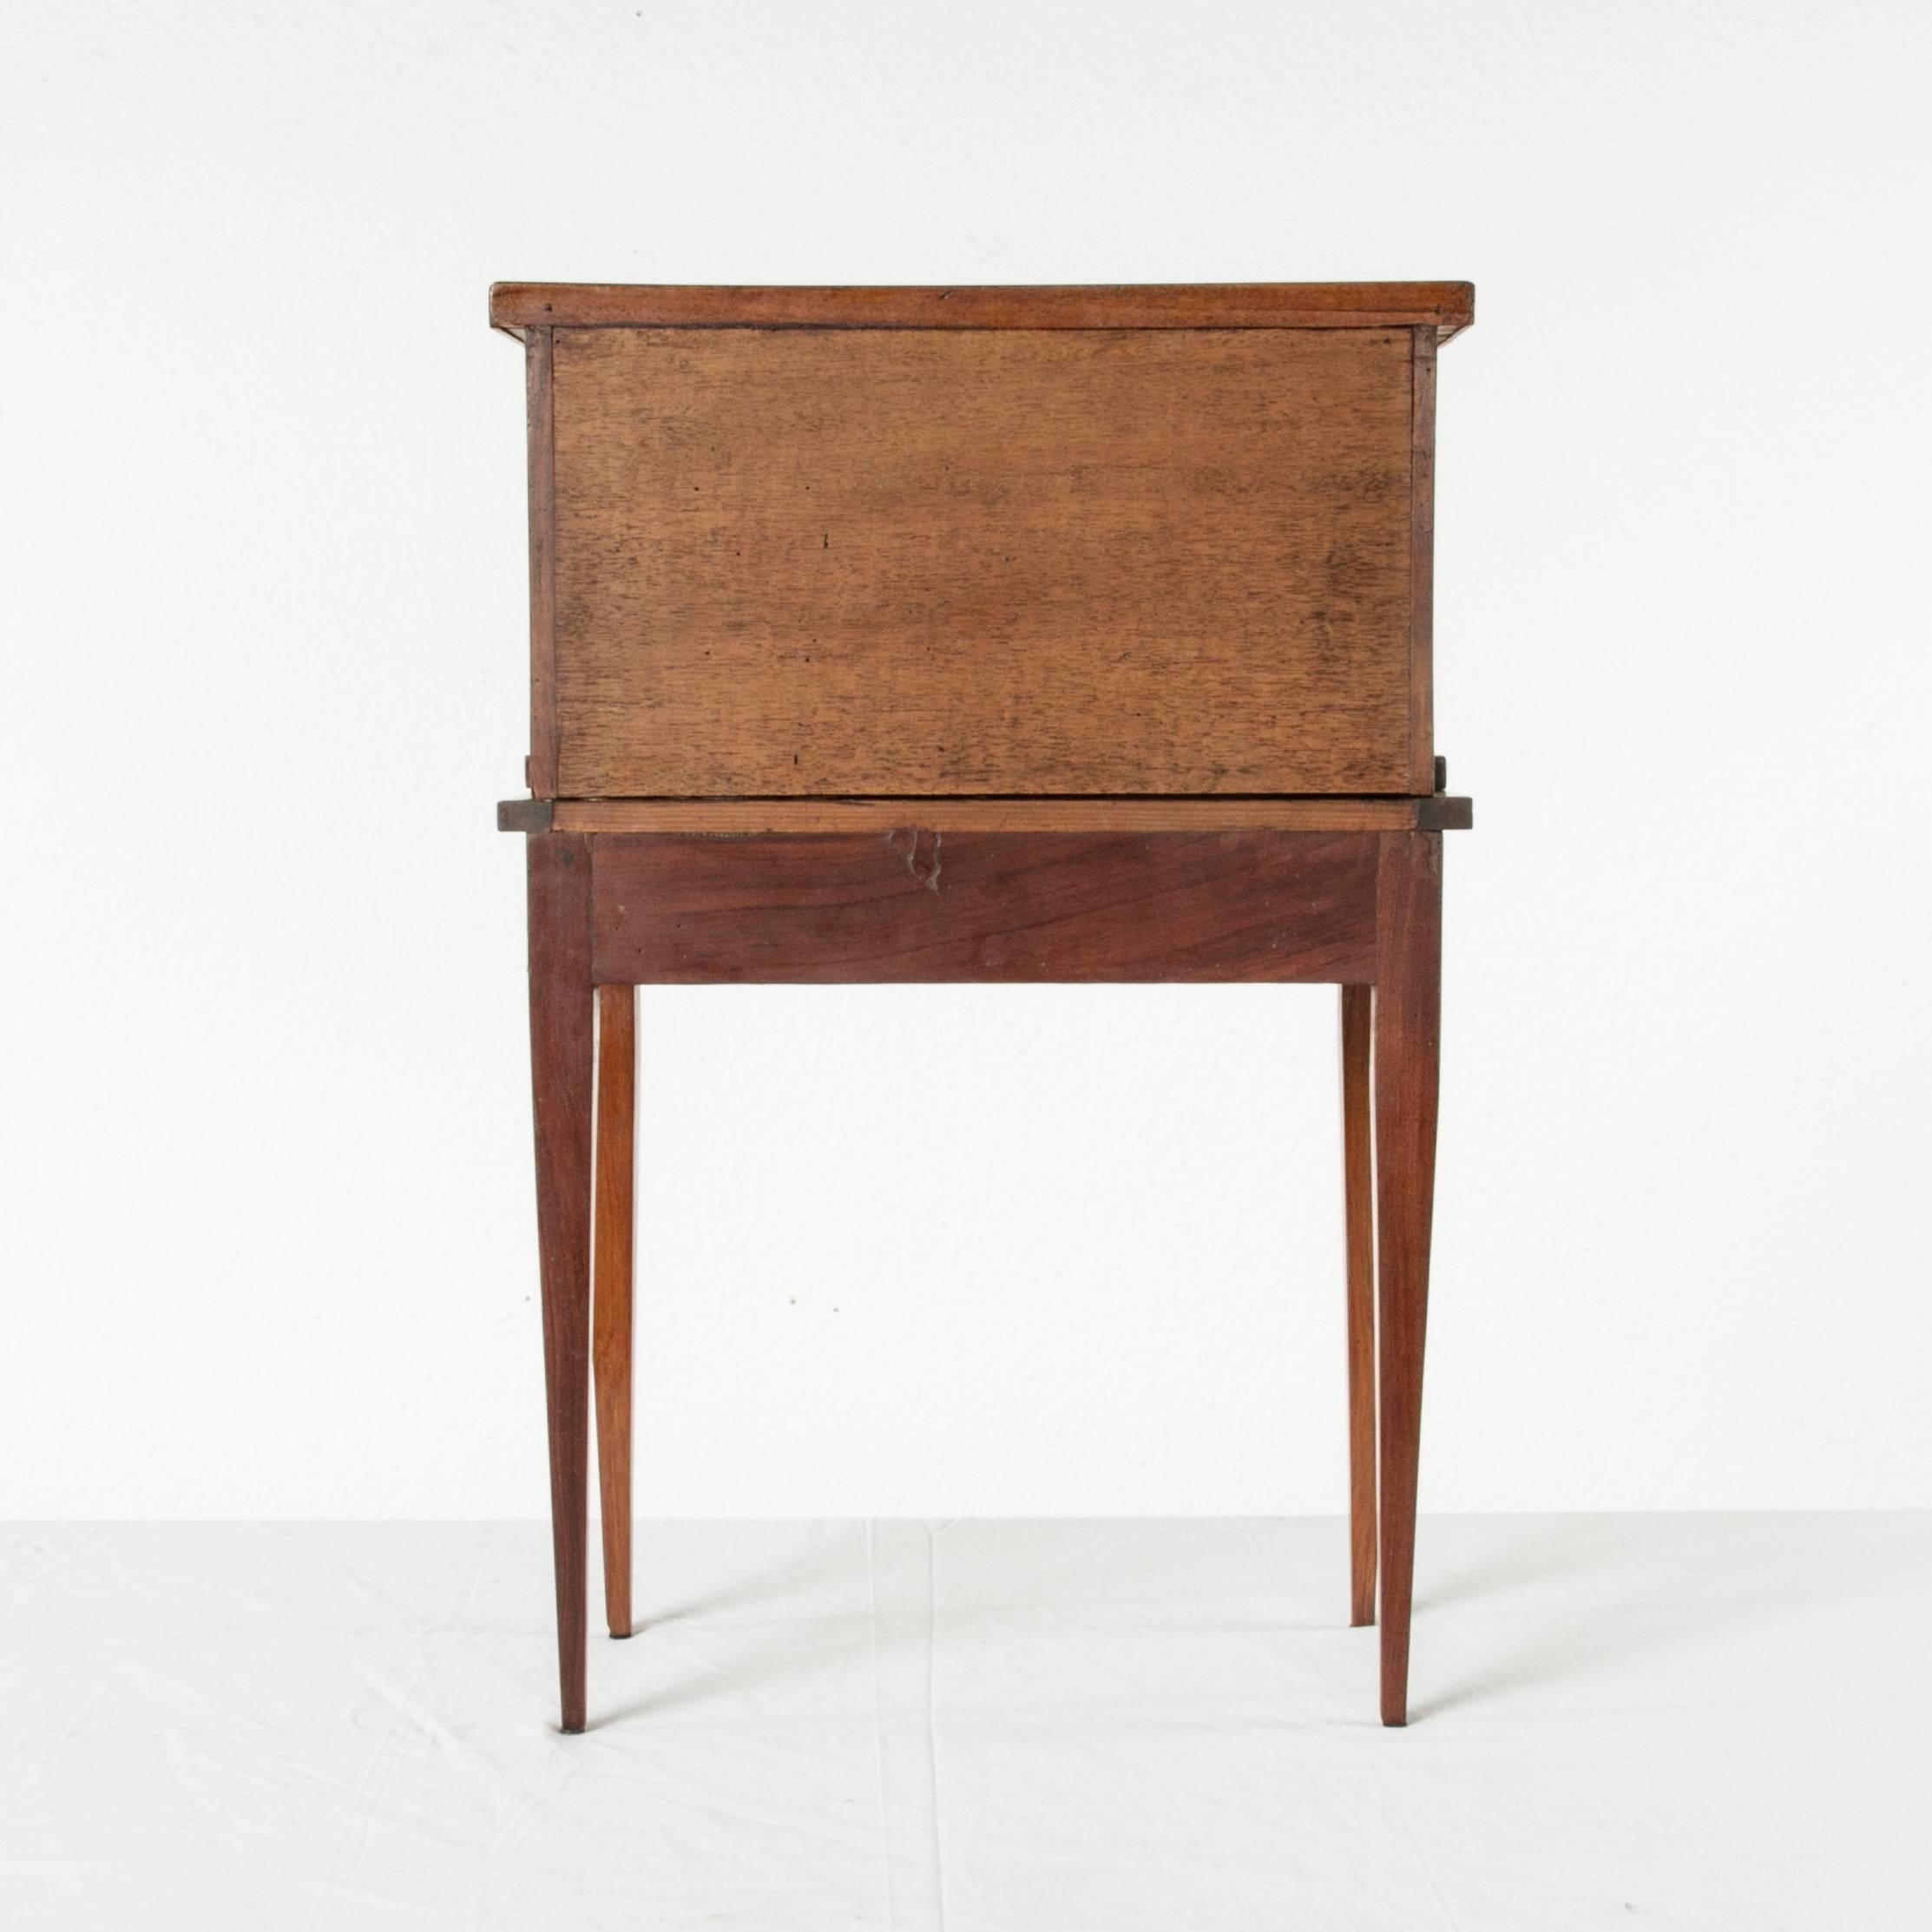 This rare 19th century miniature Louis XVI style model writing desk or bonheur du jour features an upper cabinet and fold out leather top writing surface. Called a bonheur du jour in French, this meuble de maitrise was created as a masterwork of a